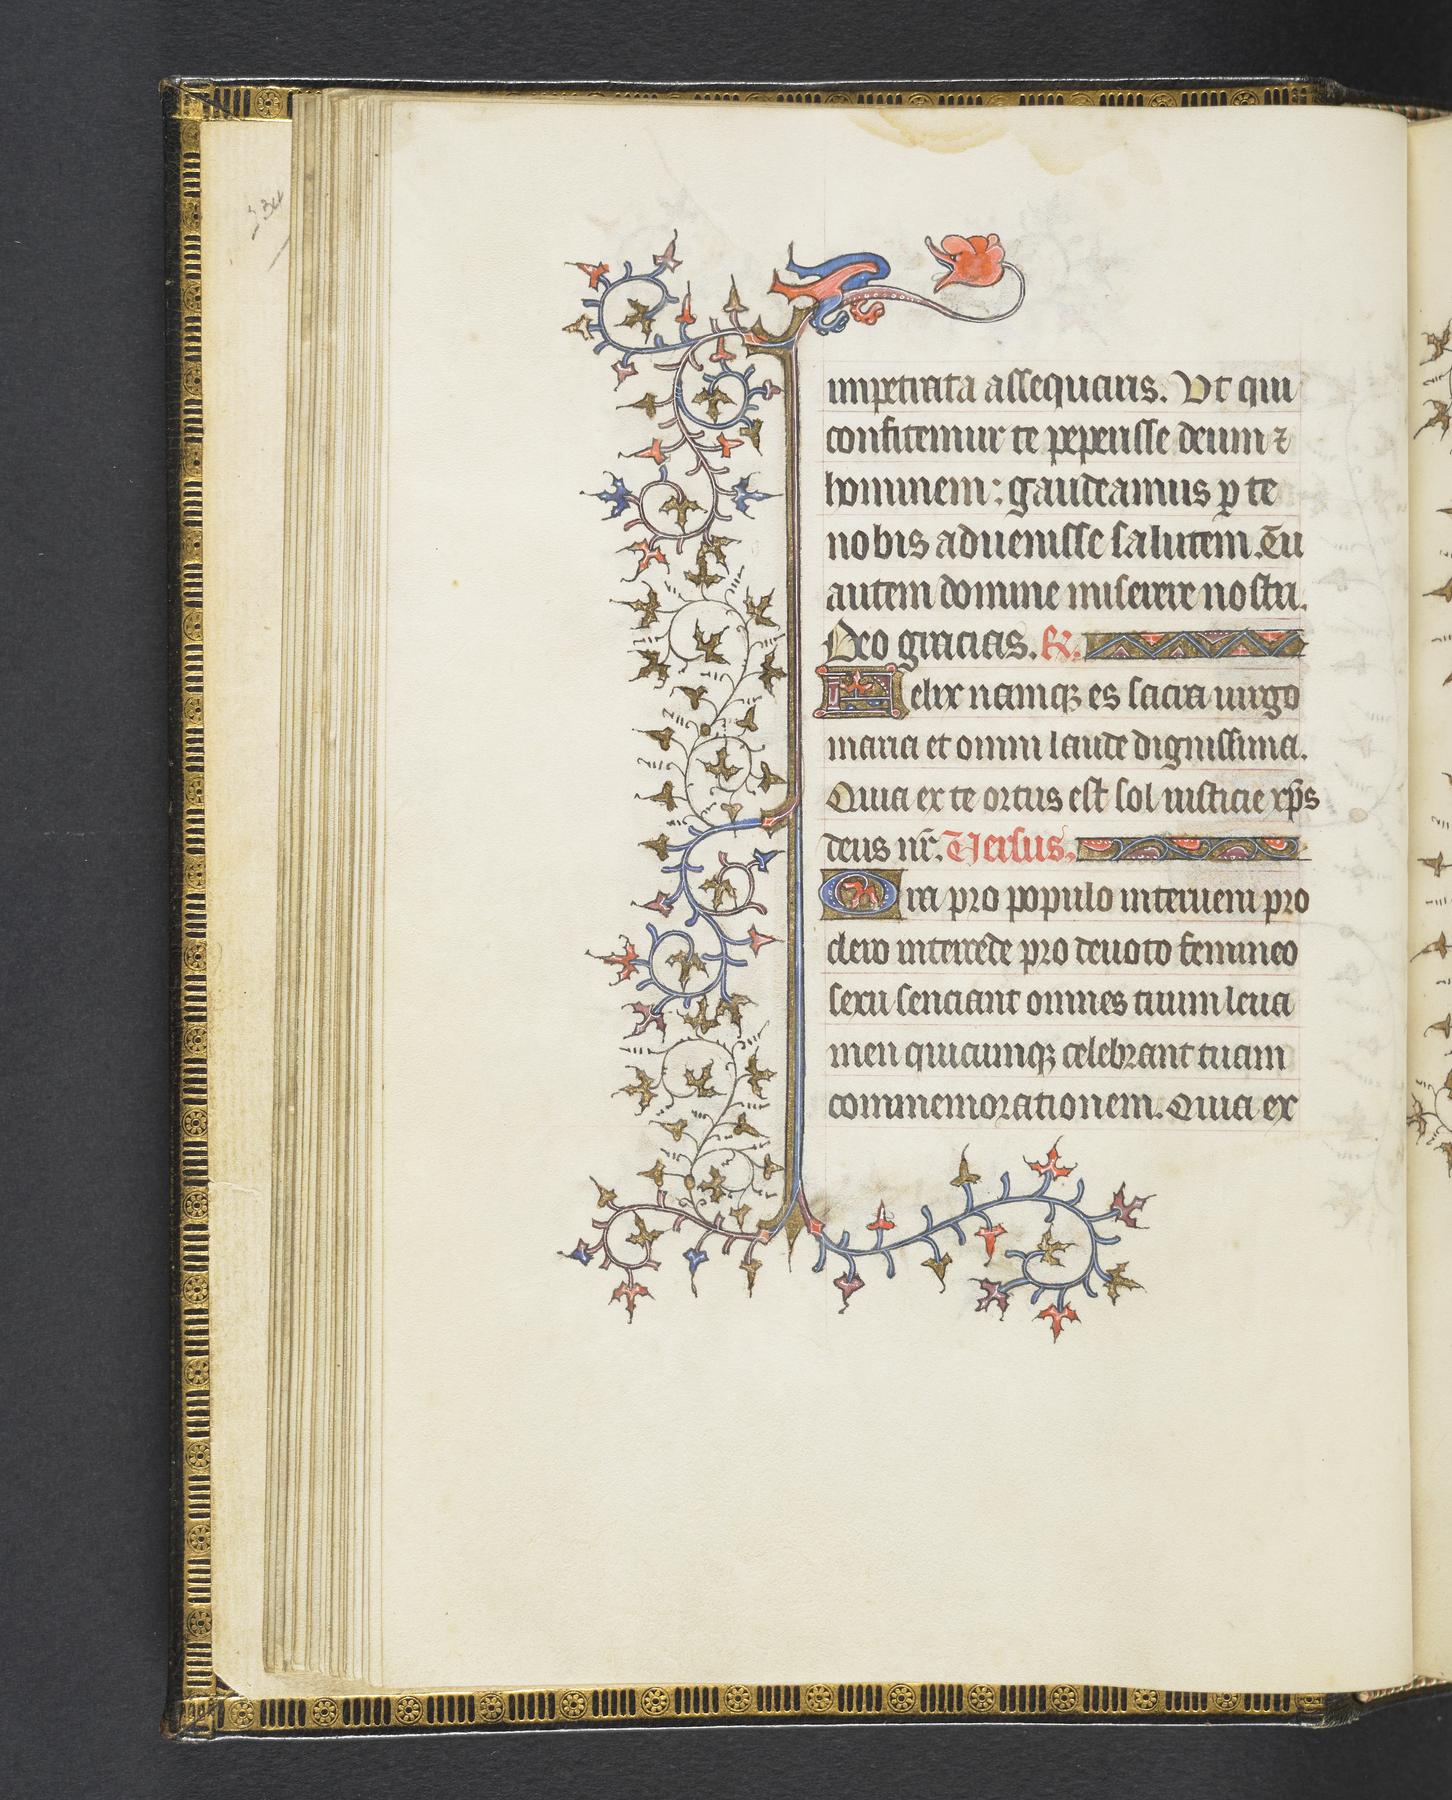 Coffee with a Codex: Book of Hours with Dragons